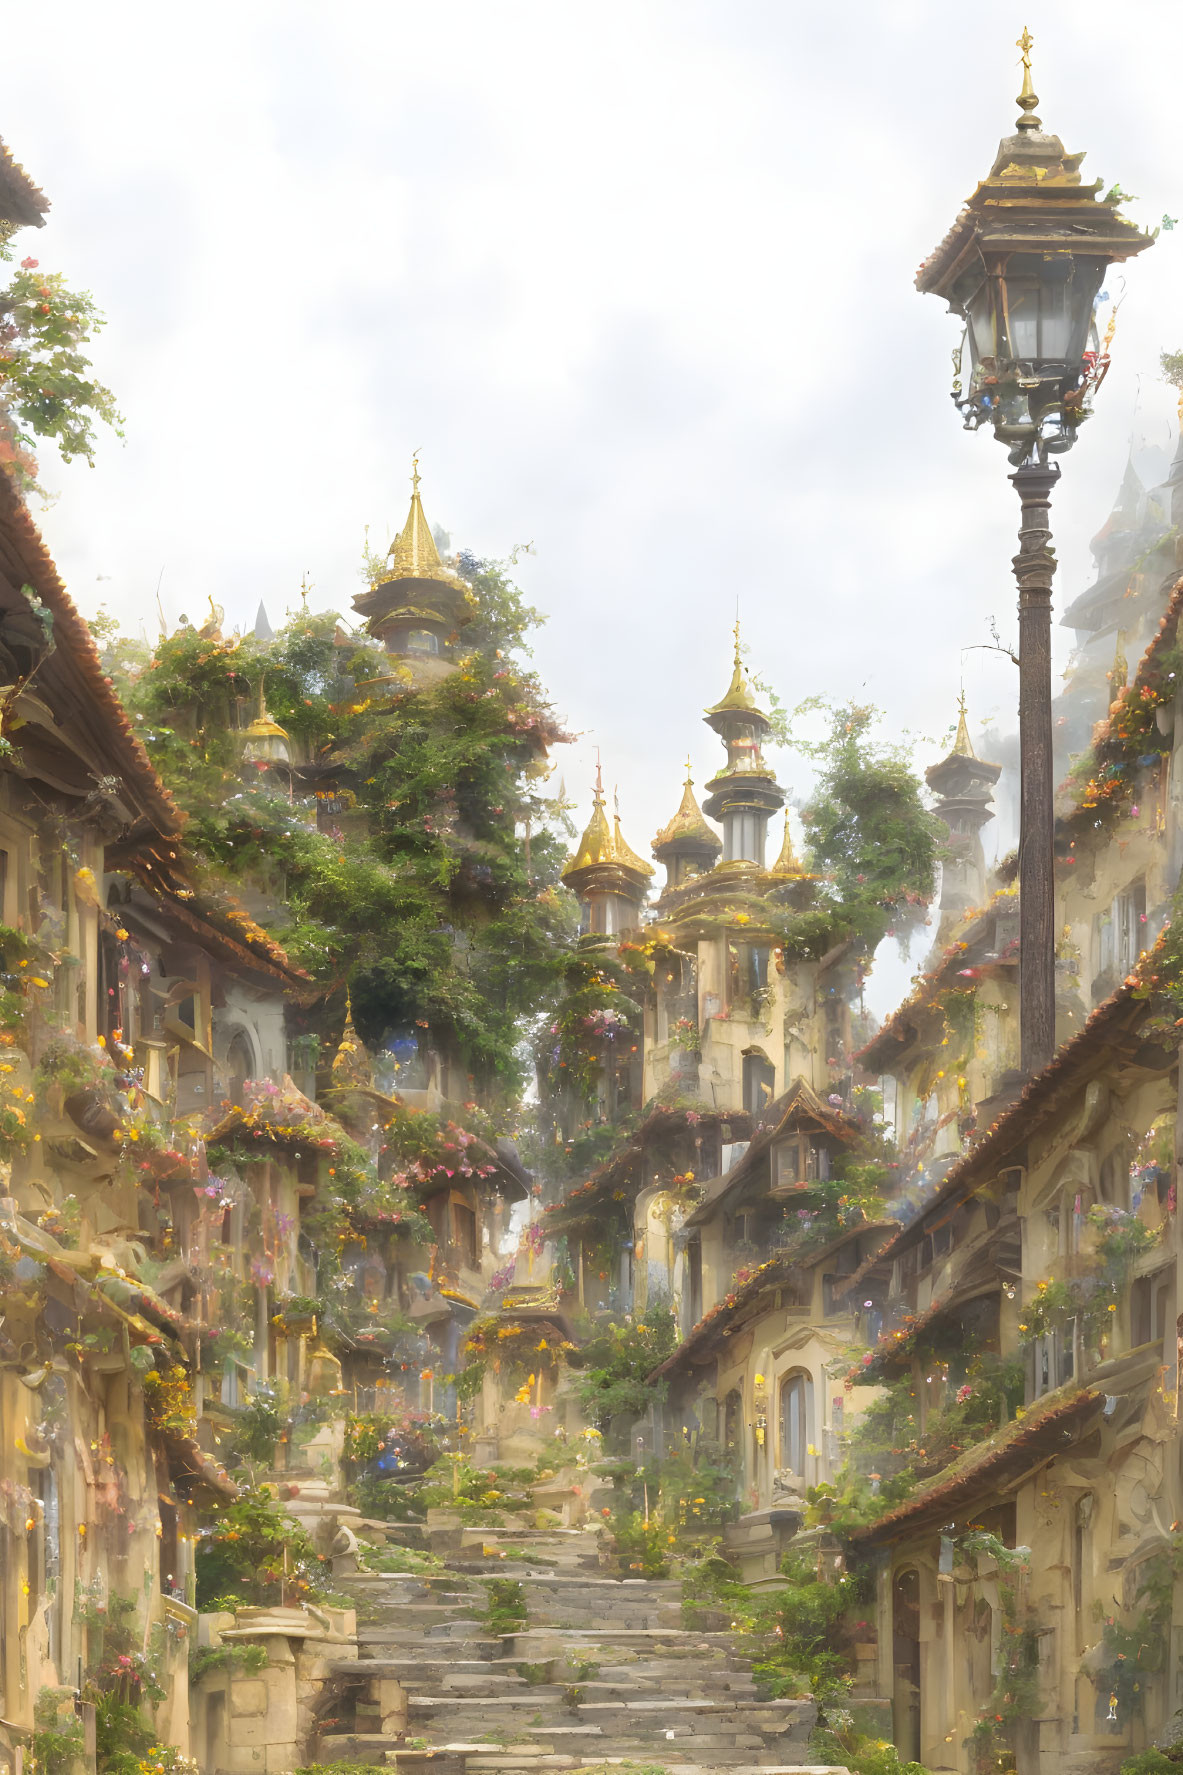 Ethereal cityscape with golden domed rooftops and lush foliage